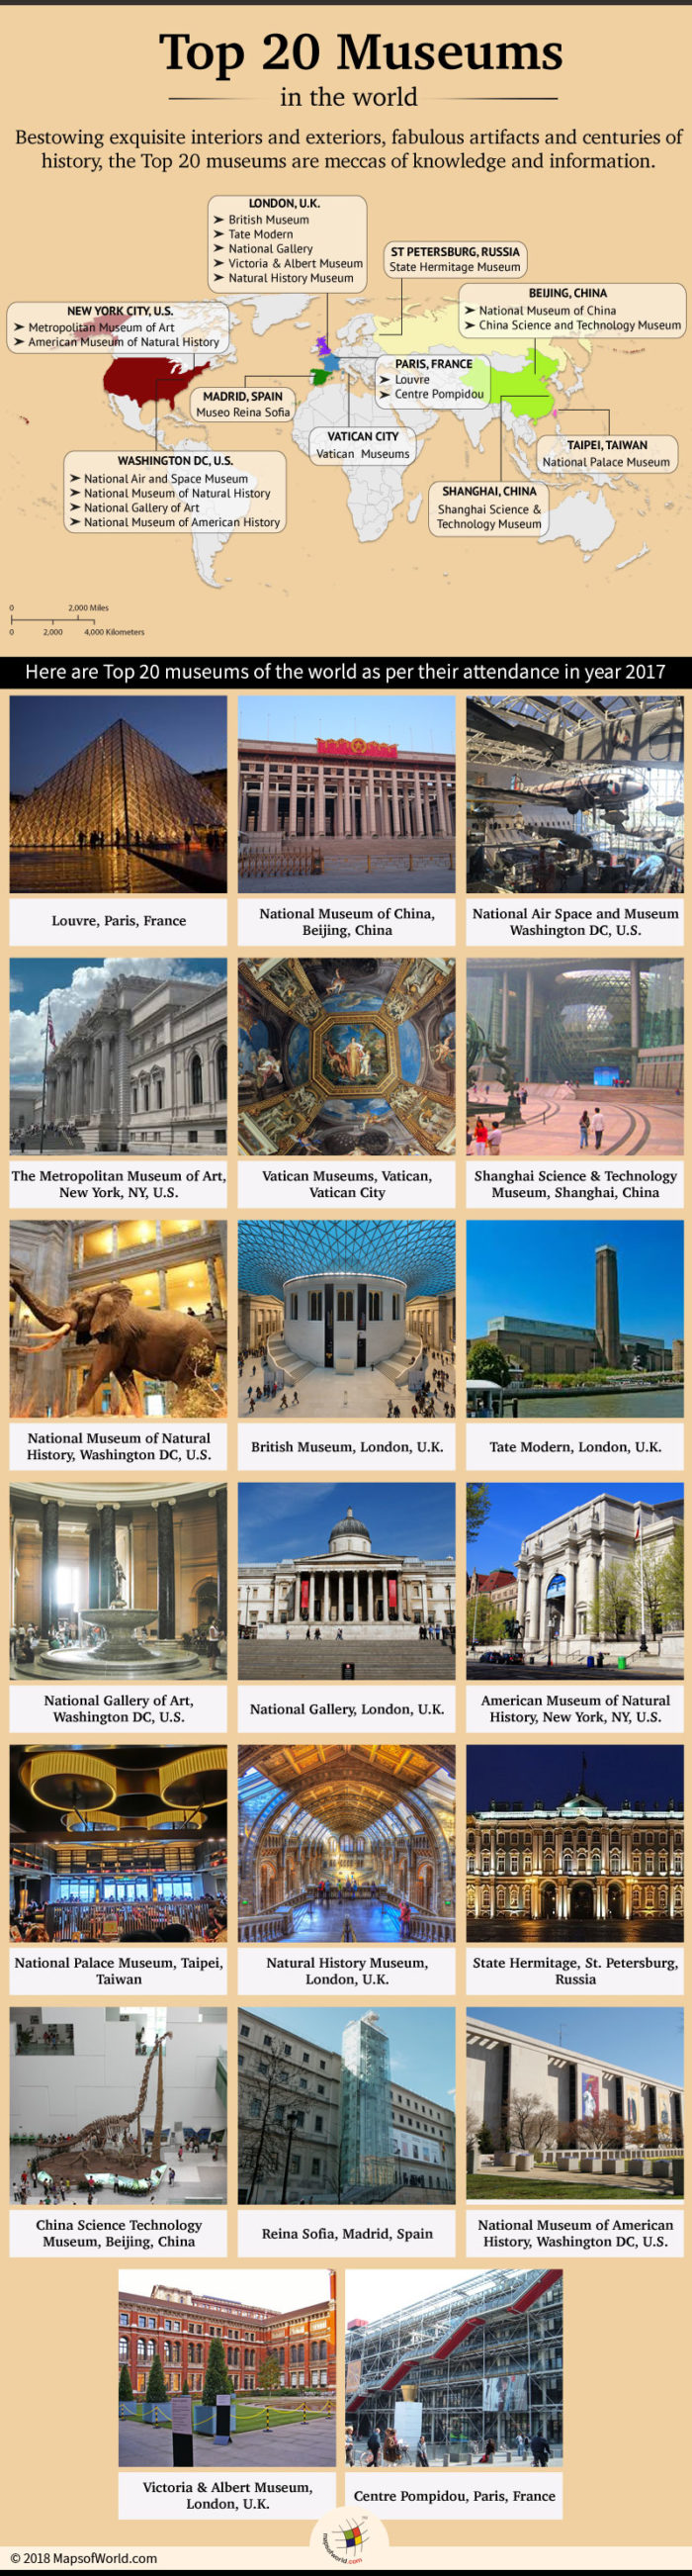 Infographic elaborating top 20 museums of the world